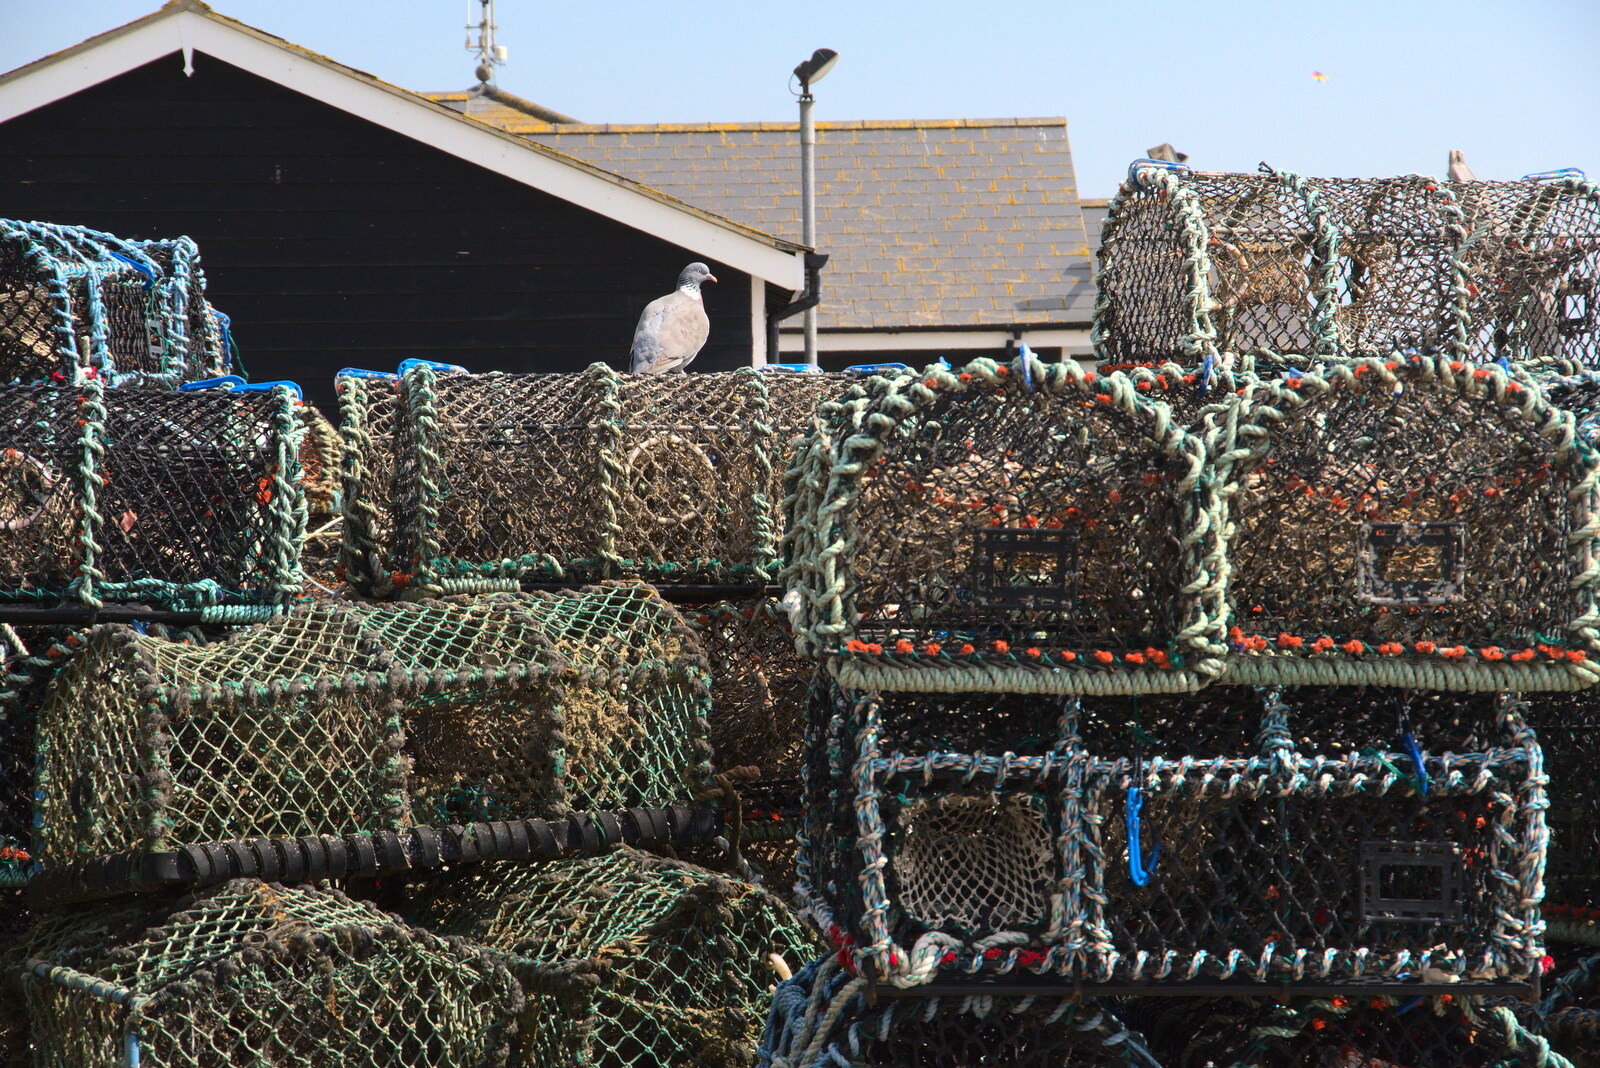 A wood pigeon on lobster pots from A Chilly Trip to the Beach, Southwold Harbour, Suffolk - 2nd May 2021